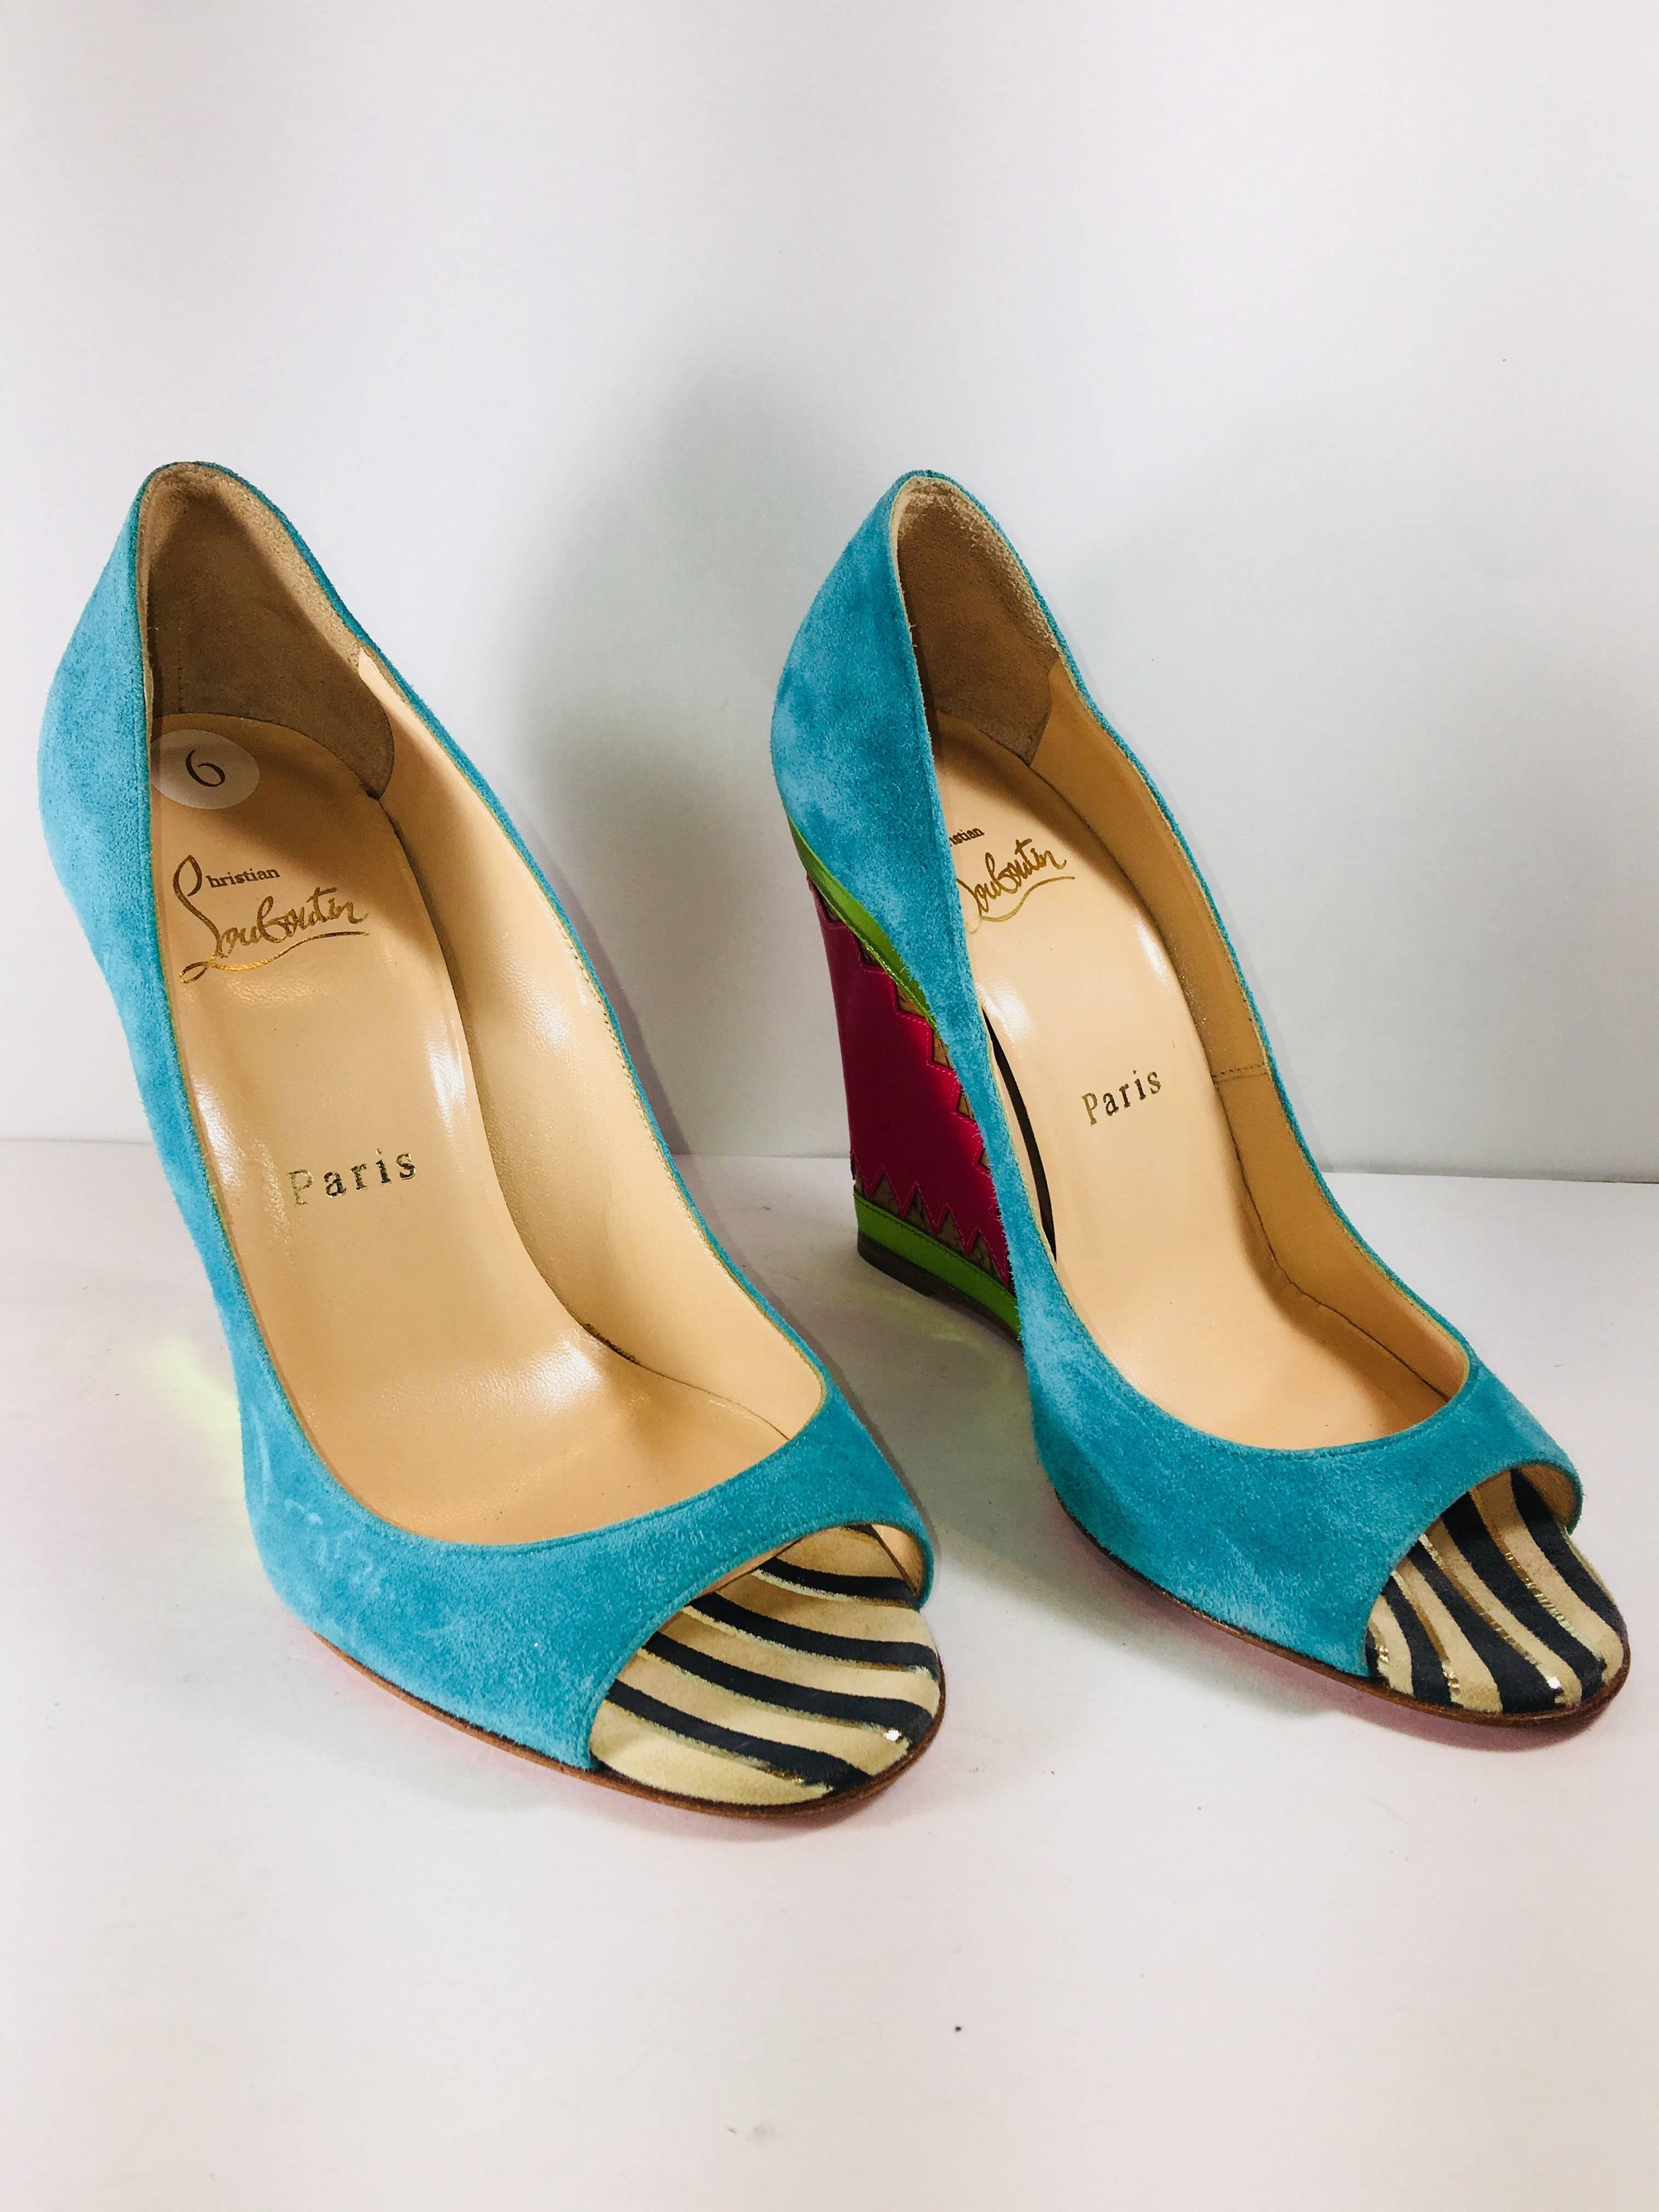 Christian Louboutin Peep-toe Heels in Turquoise Suede with Green Metallic Trim and Cork Wedge with Pink Patent Detail.